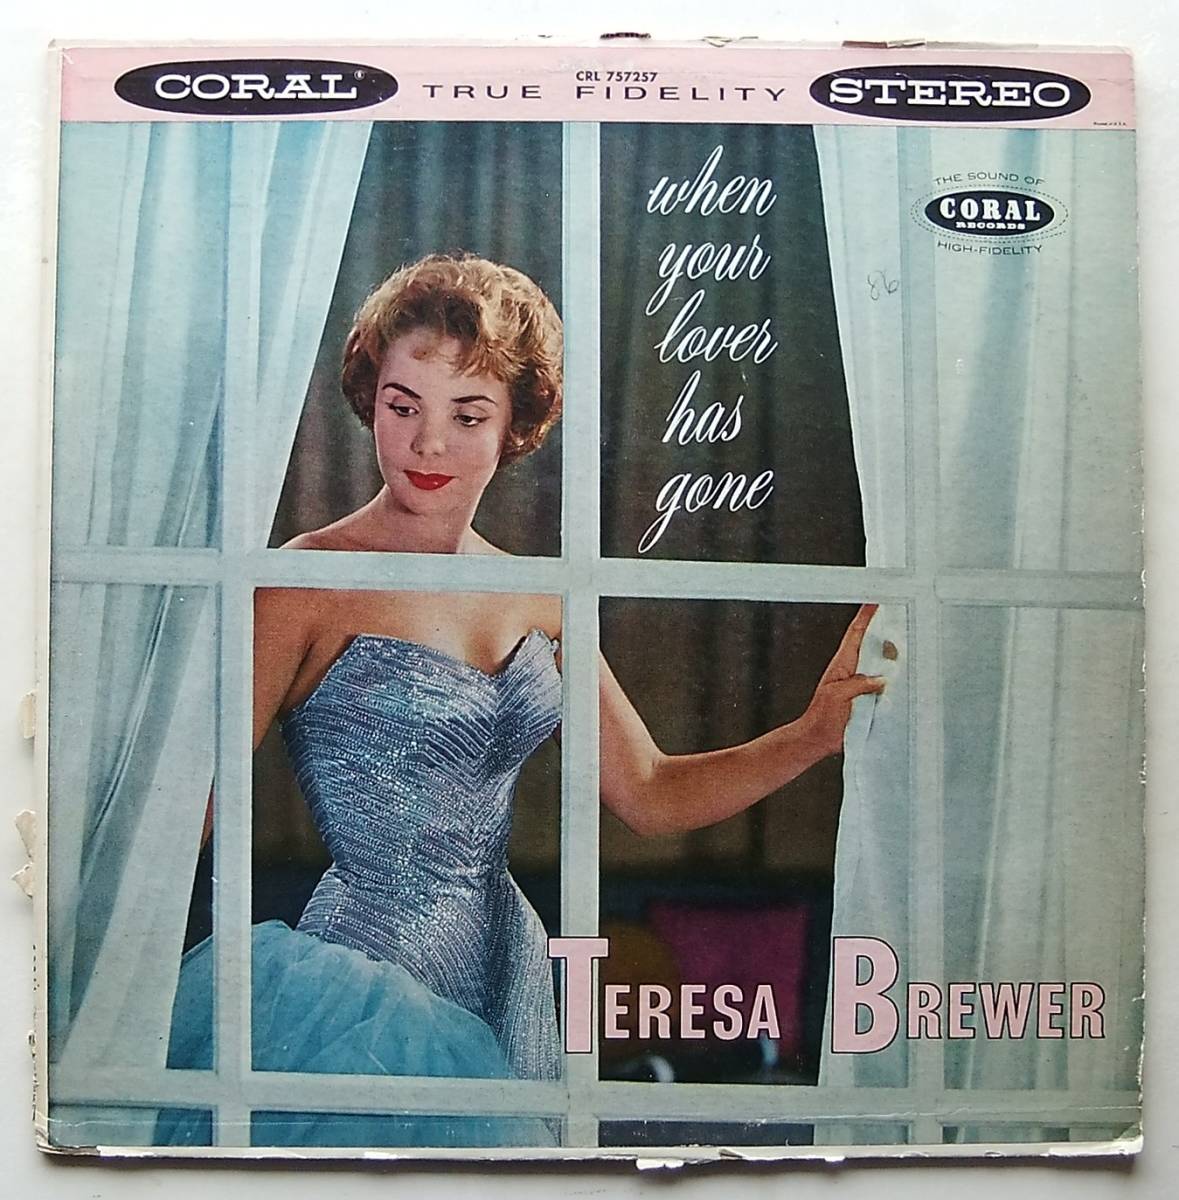 ◆ TERESA BREWER / When Your Lover Has Gone ◆ Coral CRL 757257 (red:dg) ◆ W_画像1